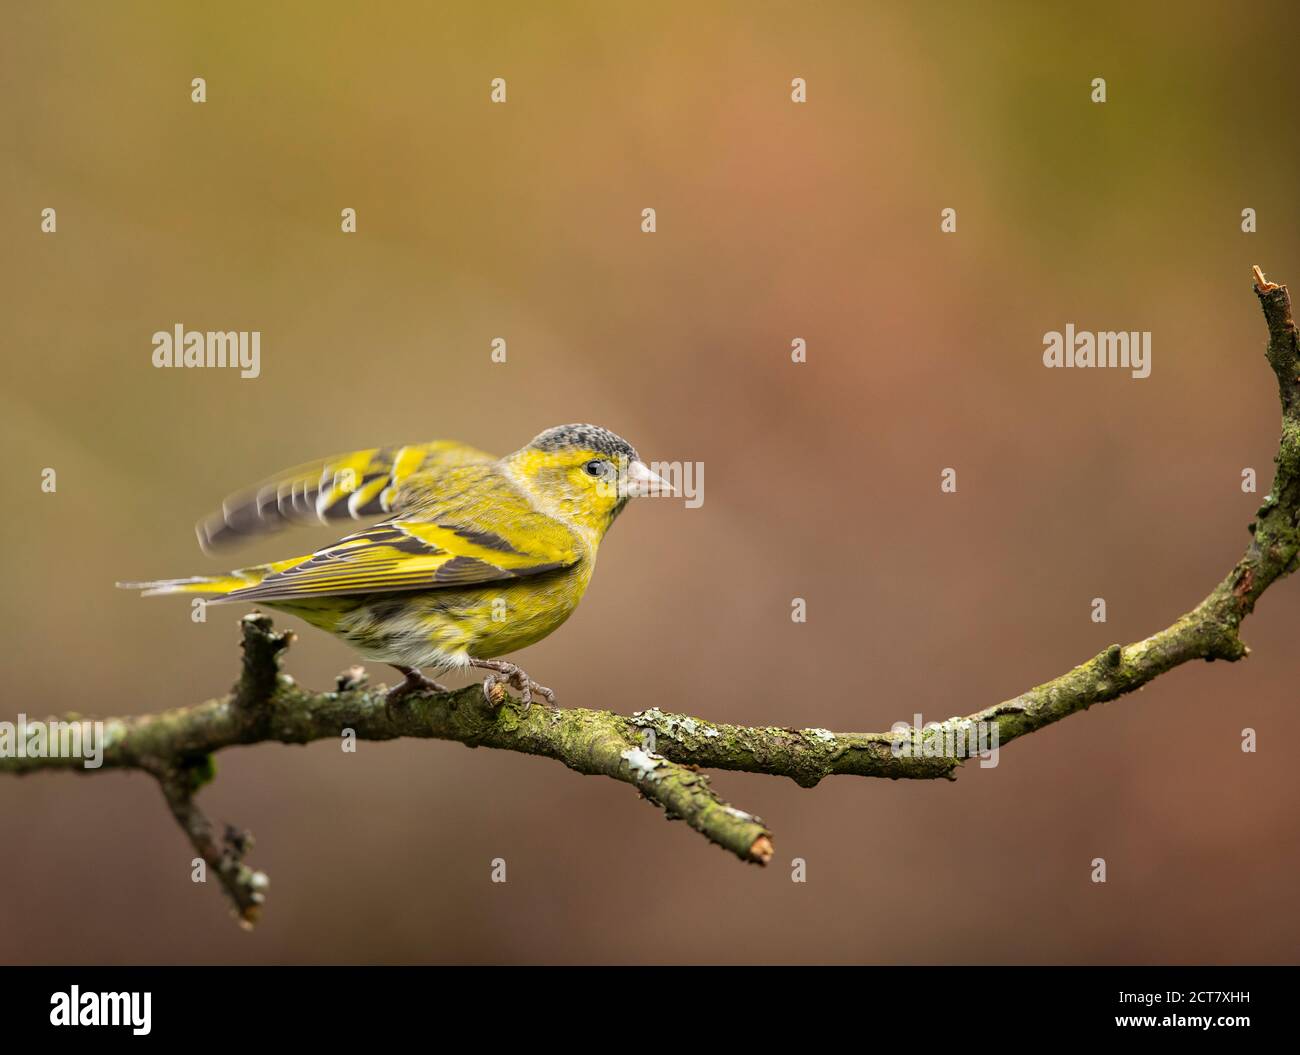 A siskin (Spinus spinus) perched on a twig taken near the Solway Firth in Scotland Stock Photo